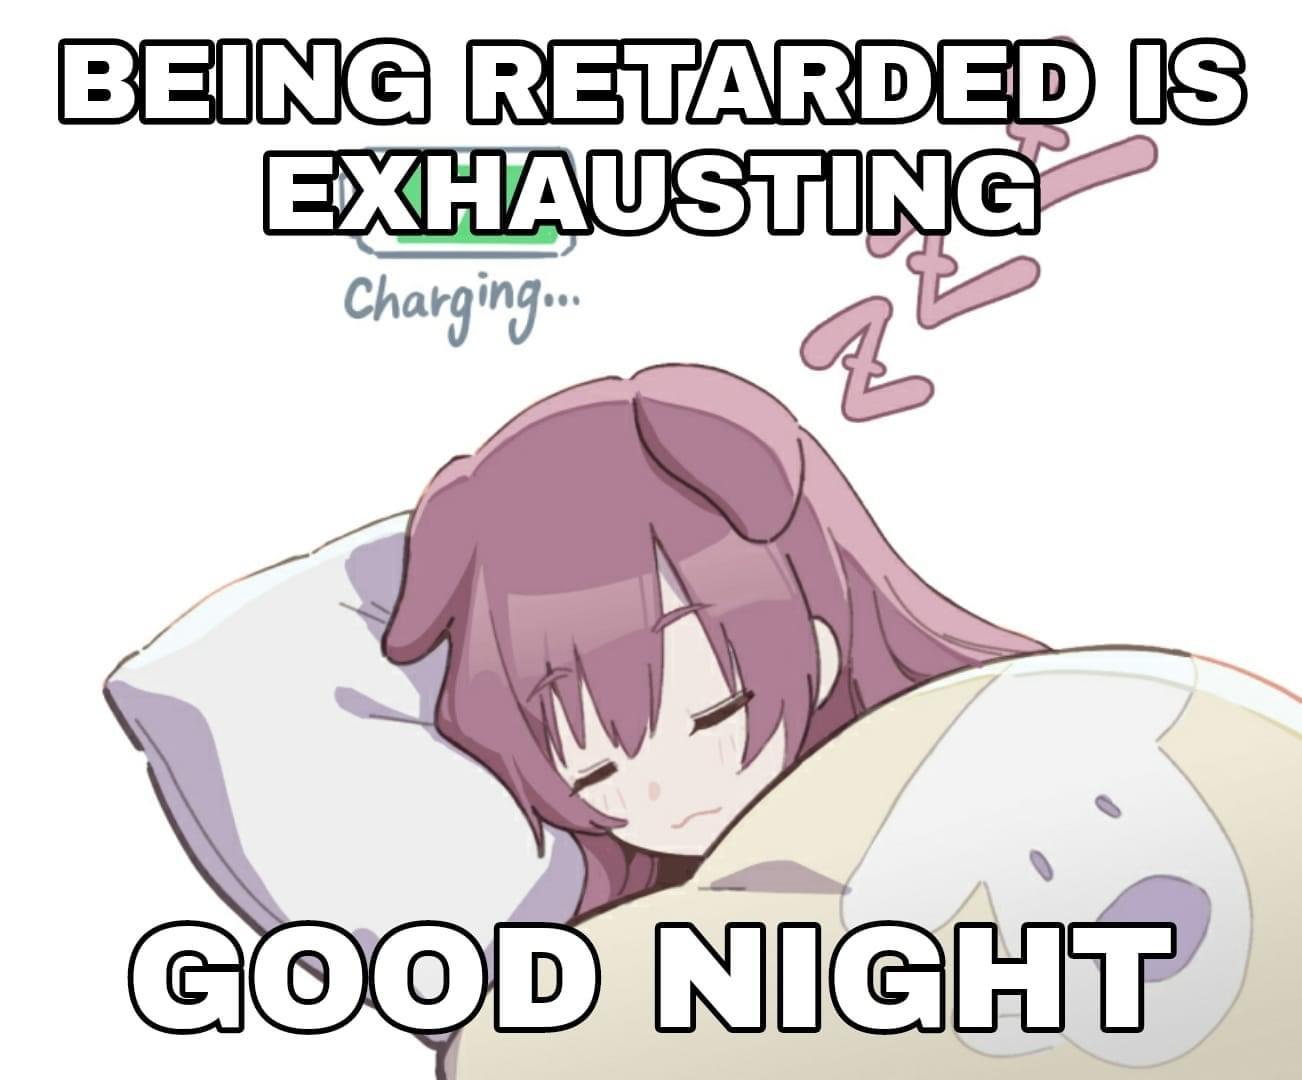 Get some rest, you earned it